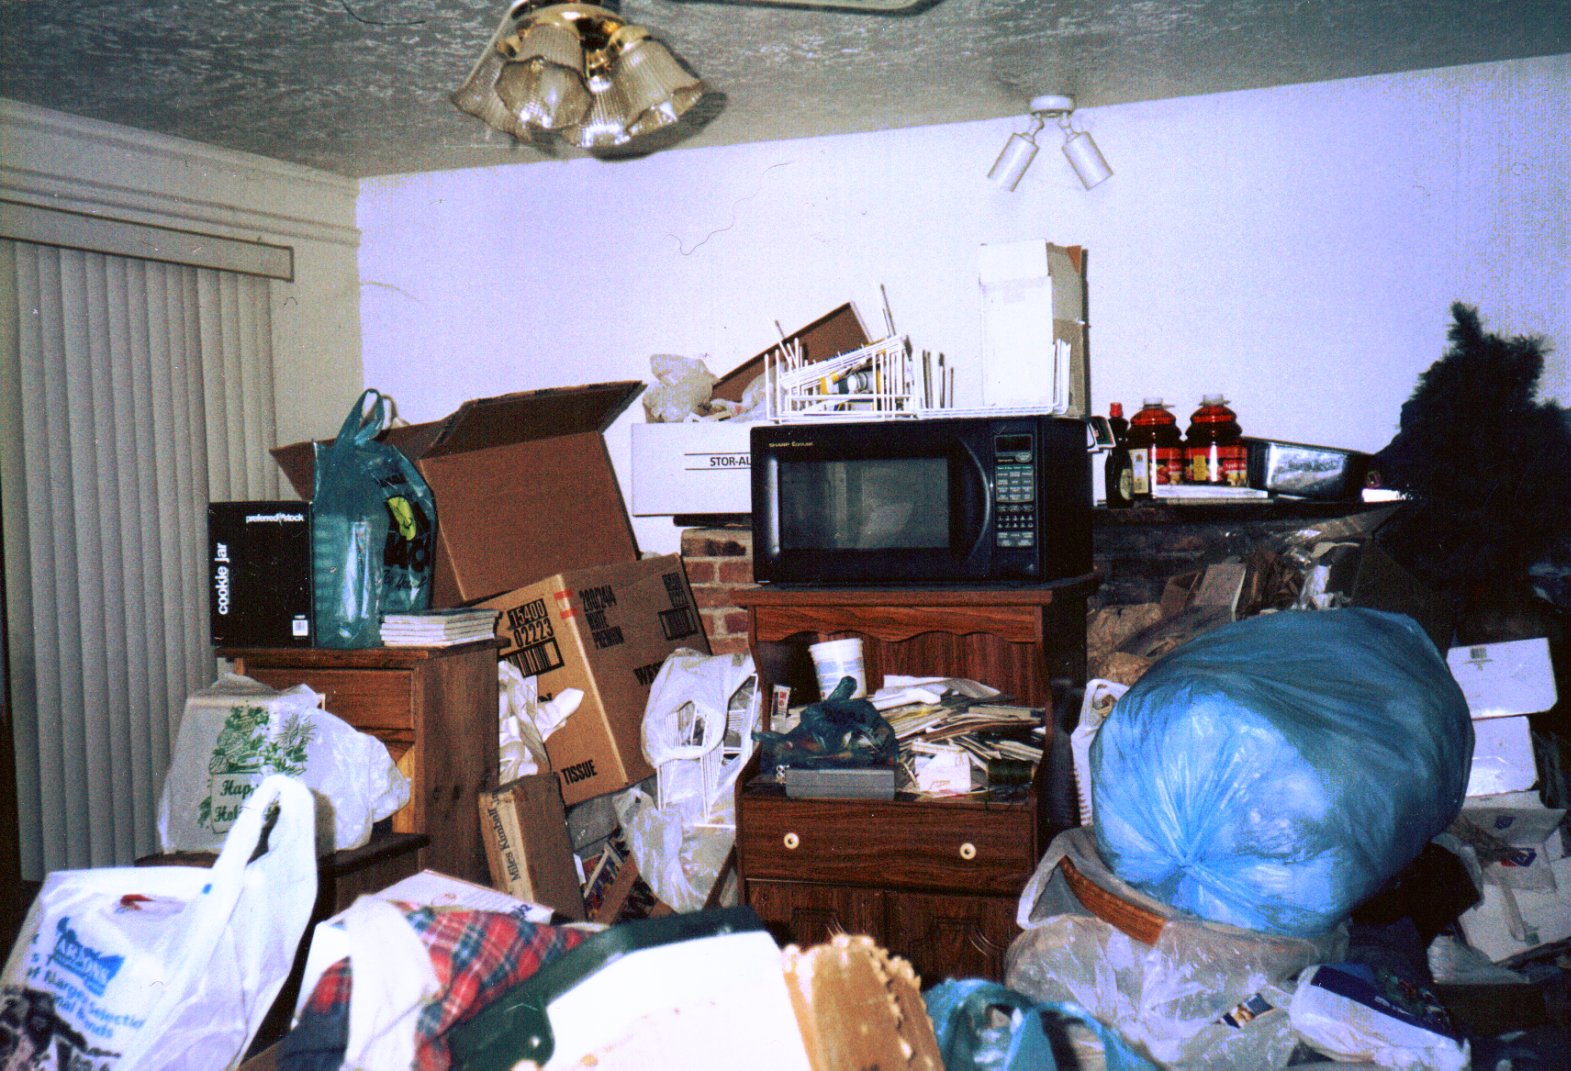 A room piled high with junk, cardboard boxes and garbage bags